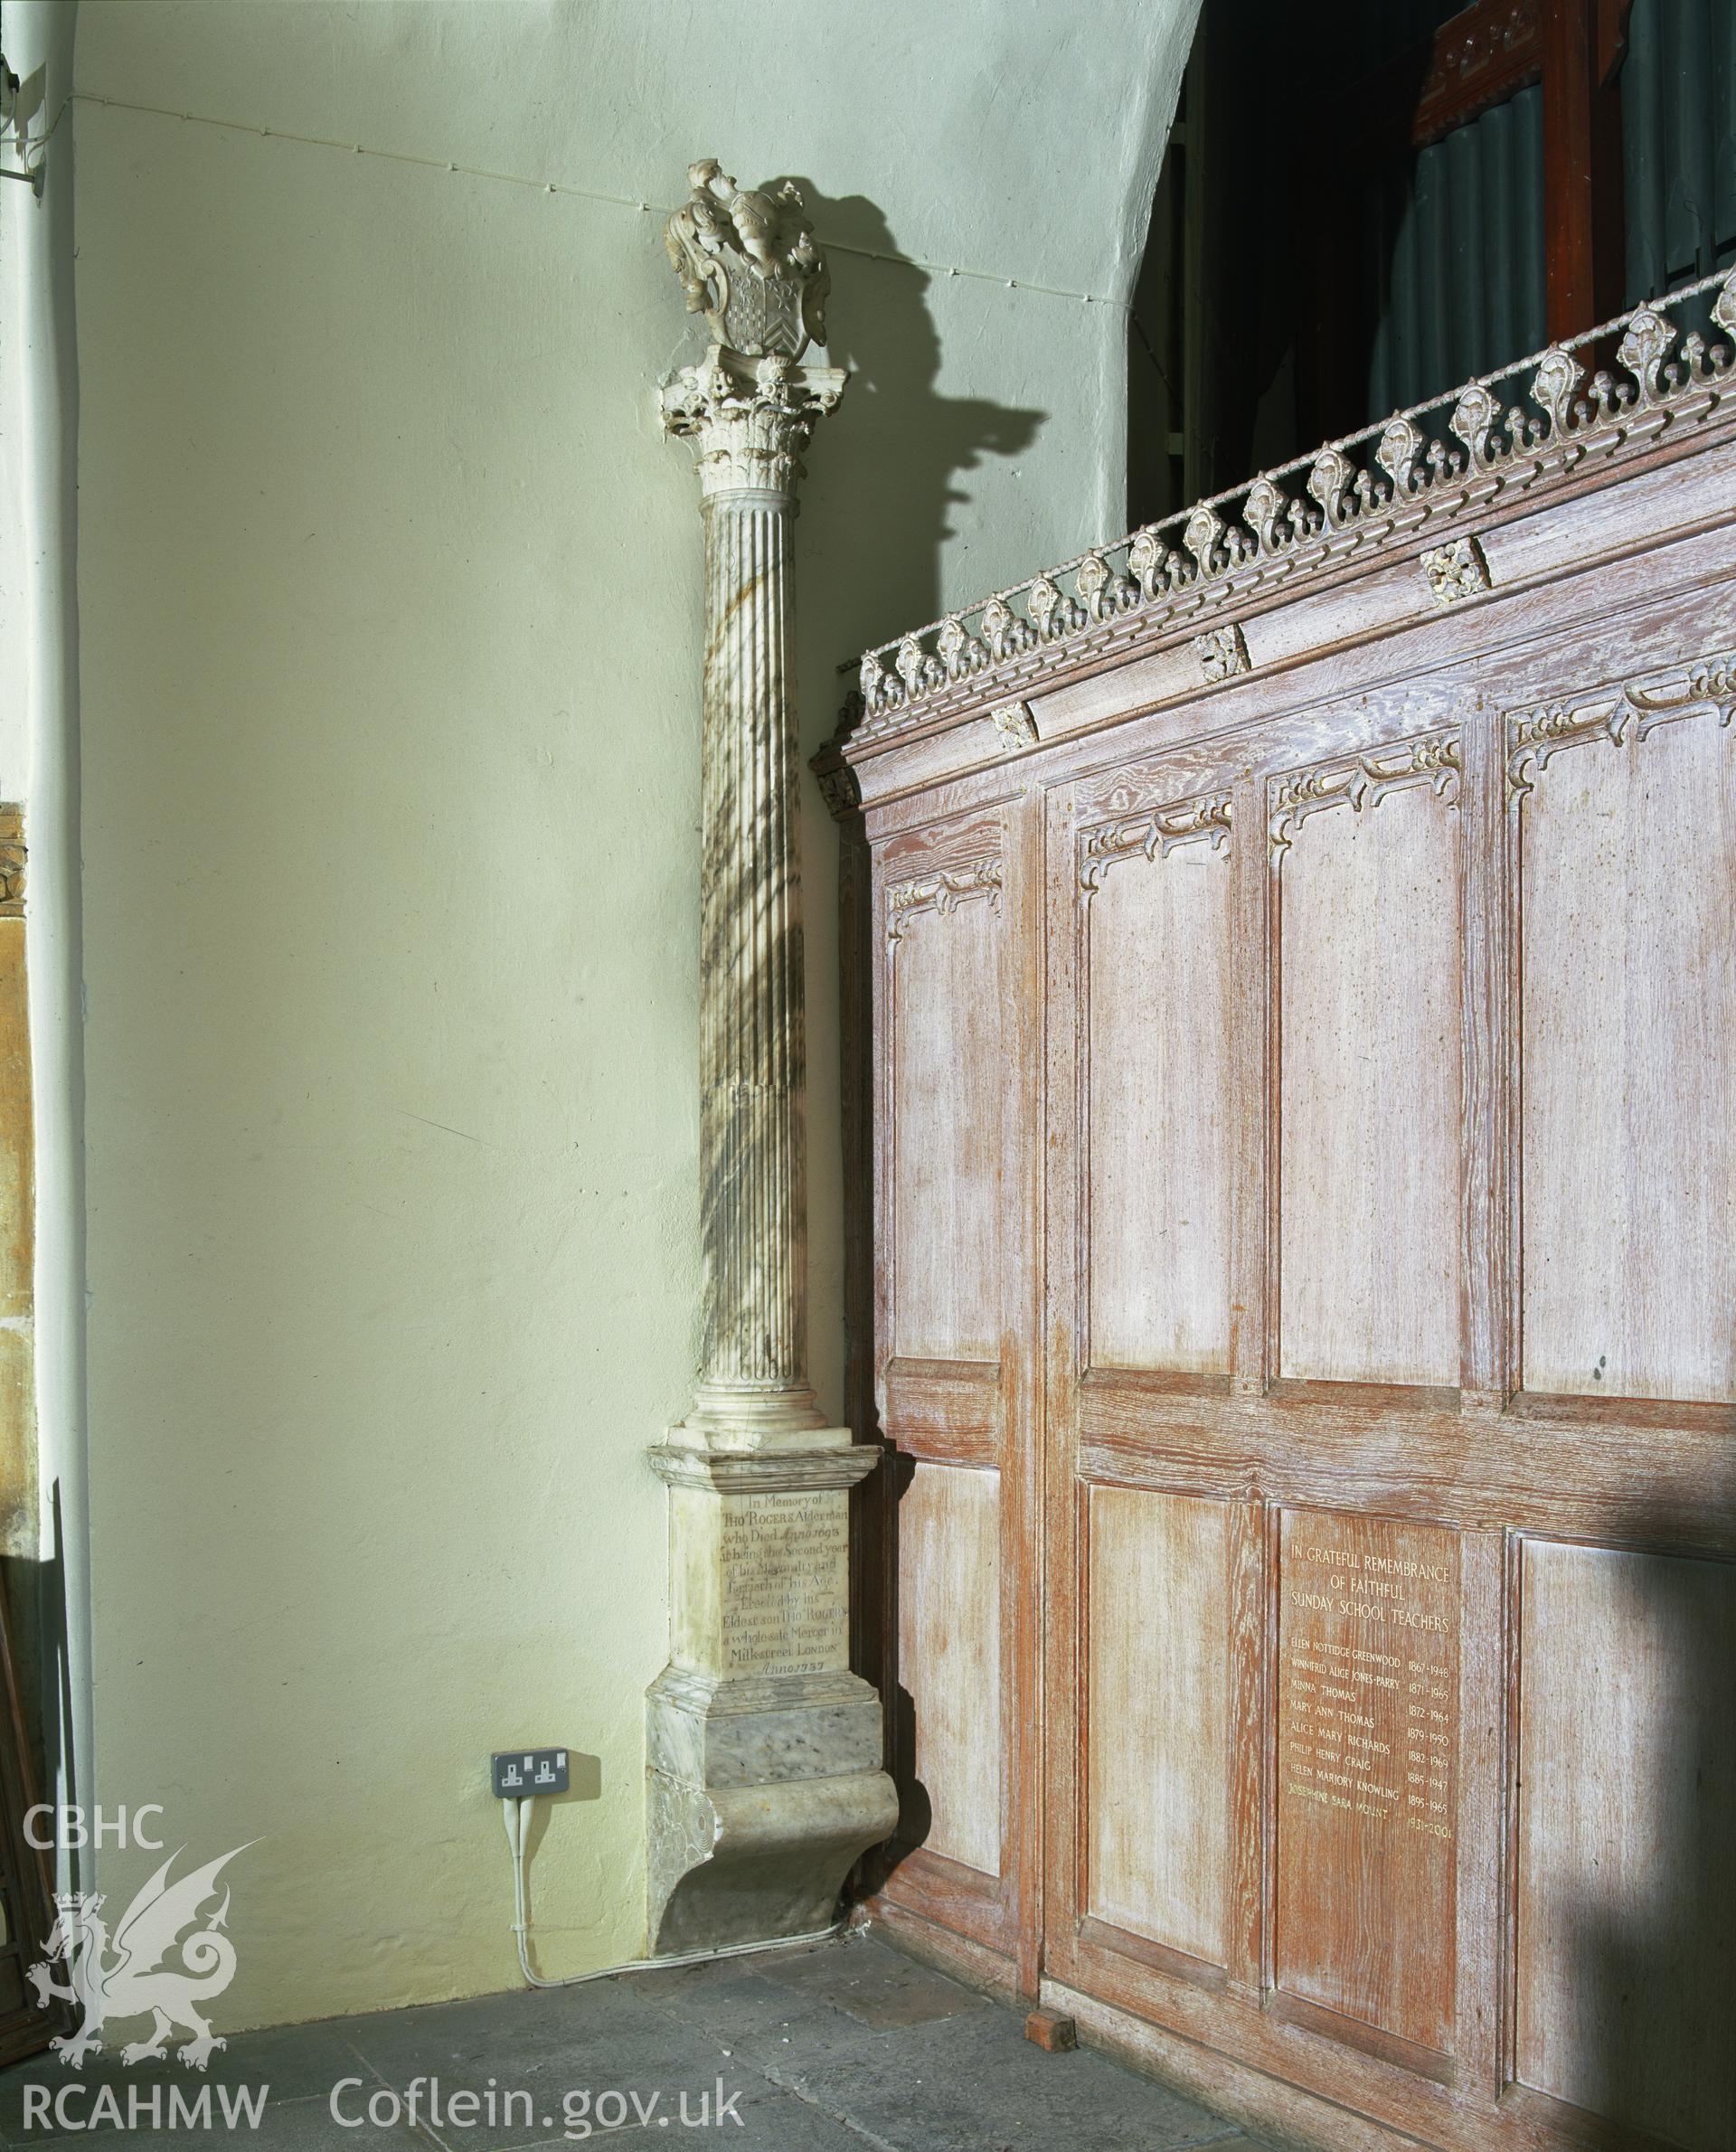 RCAHMW colour transparency showing the Rogers Memorial in Tenby Parish Church, taken by Iain Wright, 2003